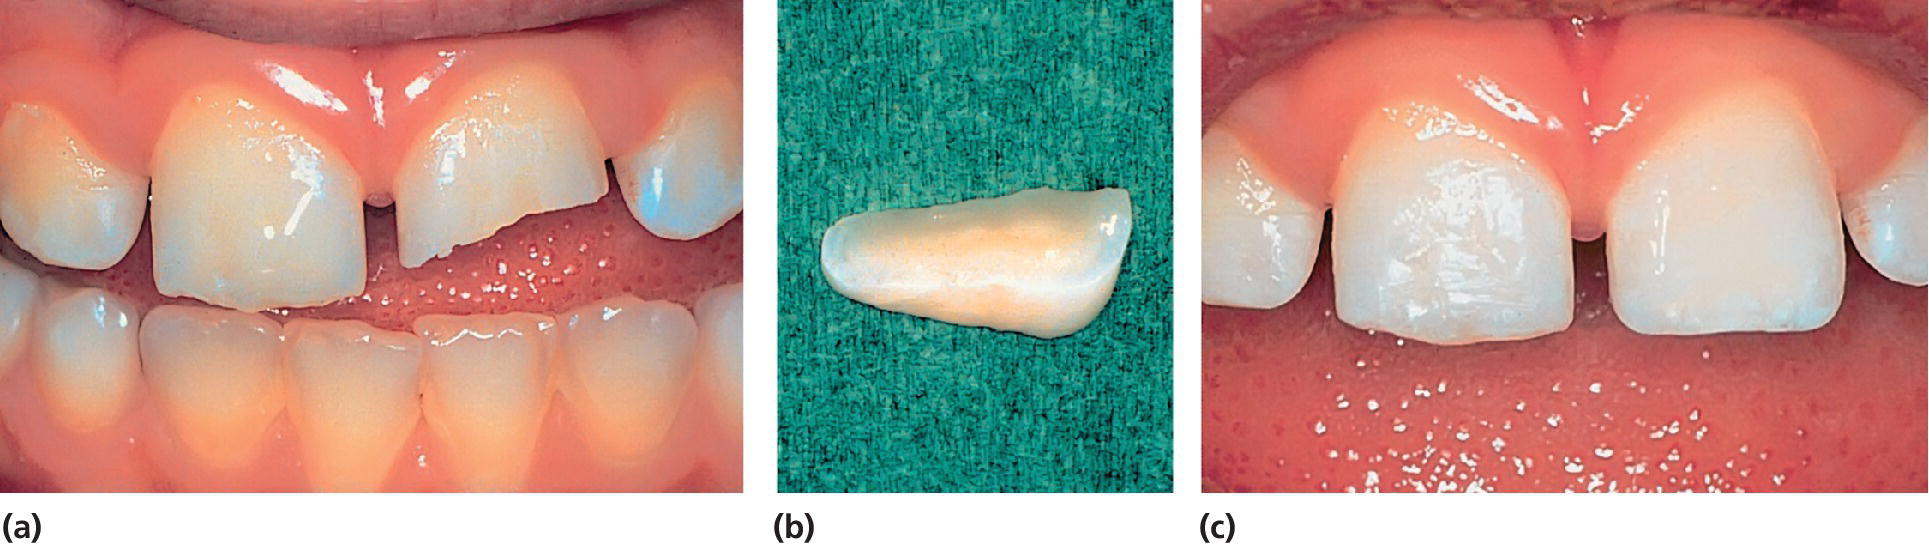 Photos displaying enamel–dentin fracture of the left central incisor in an 8‐year‐old boy (left), fractured crown fragment (center), and condition immediately after reattachment of the fragment (right).